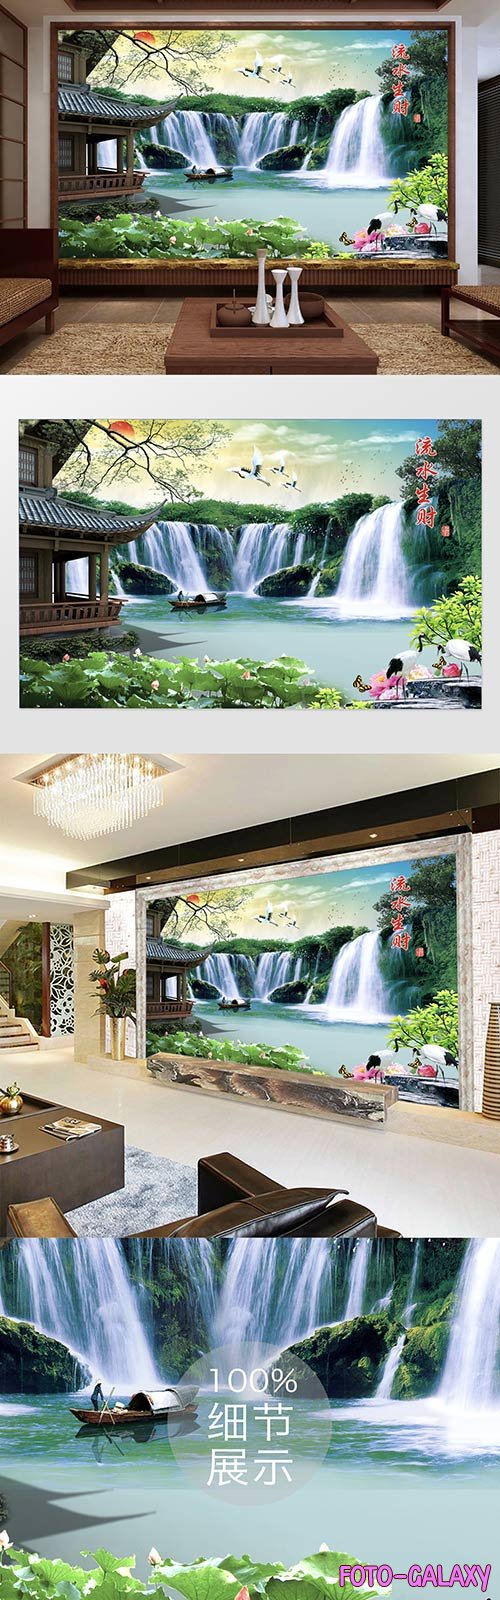 Water aquatic wealth ancient pavilion waterfall white crane tv background